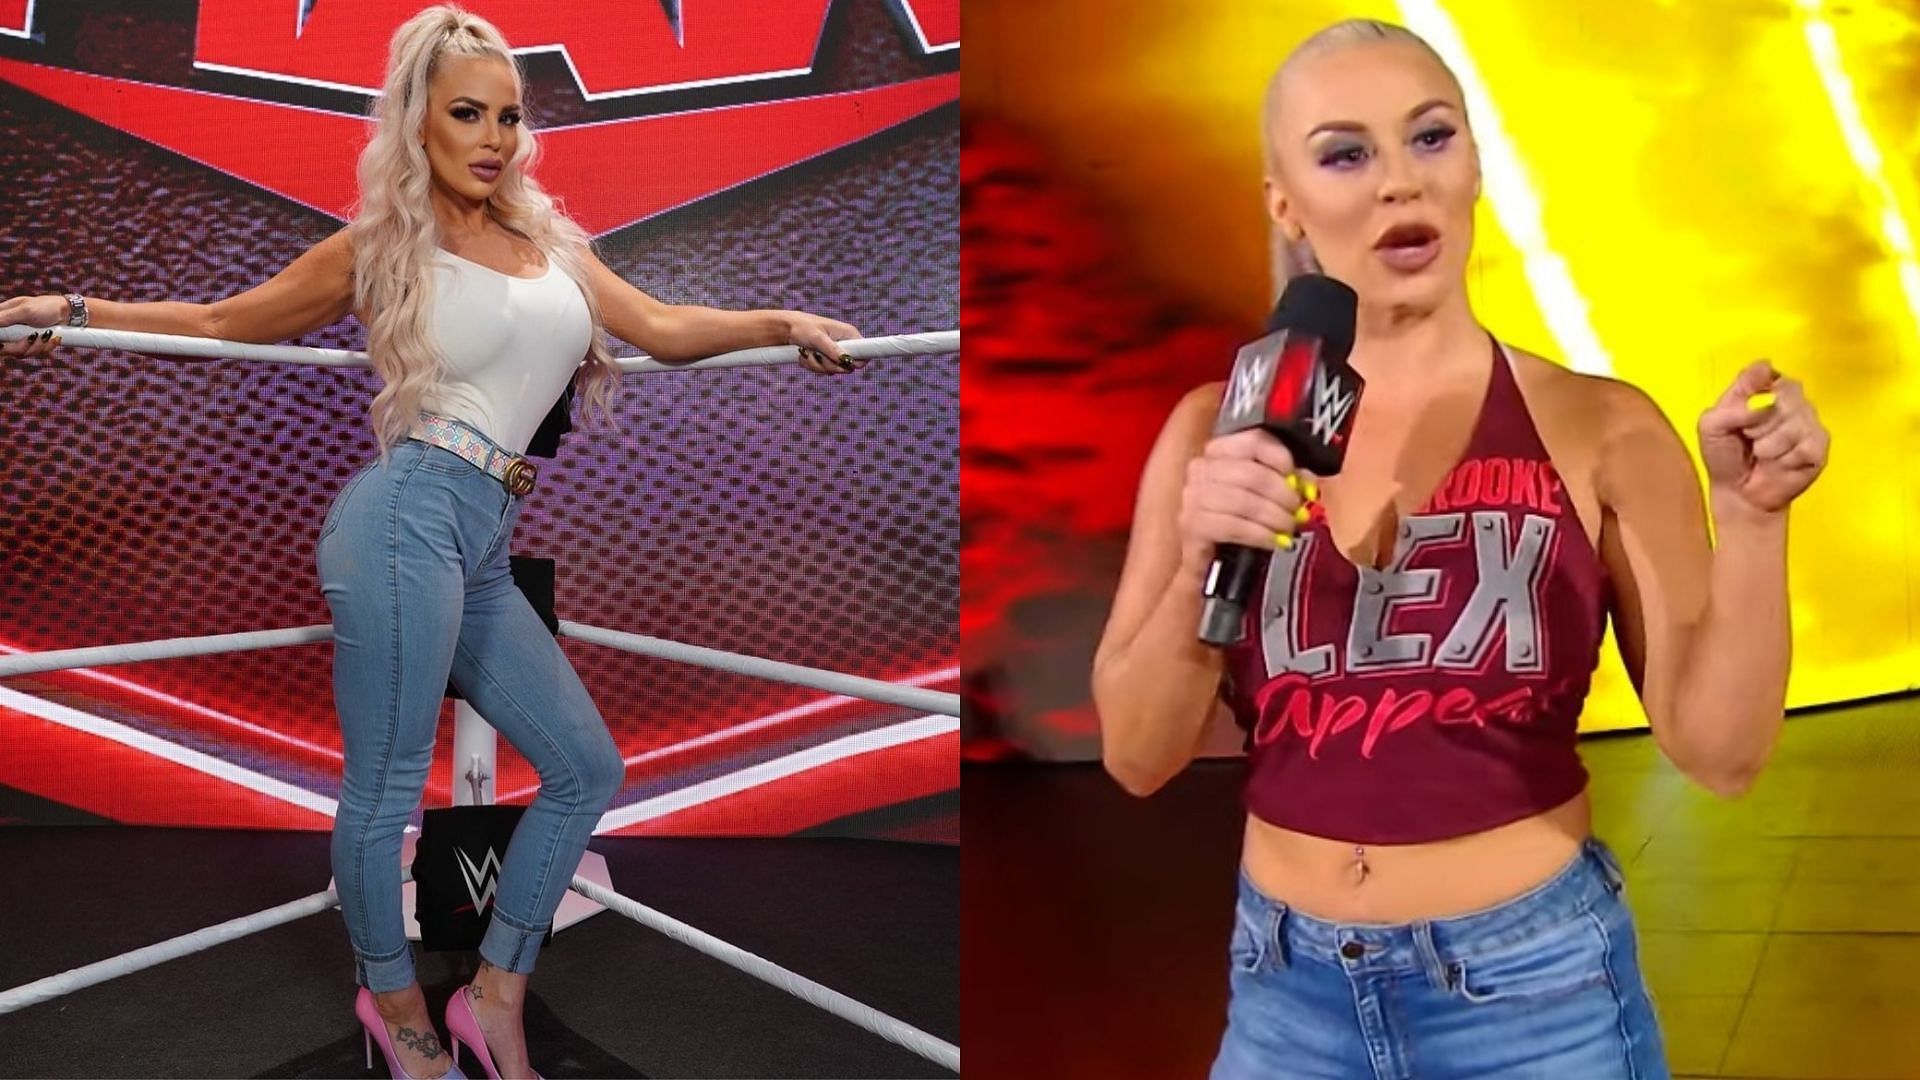 Dana Brooke defeated Becky Lynch this past Monday on RAW to retain the 24/7 Championship